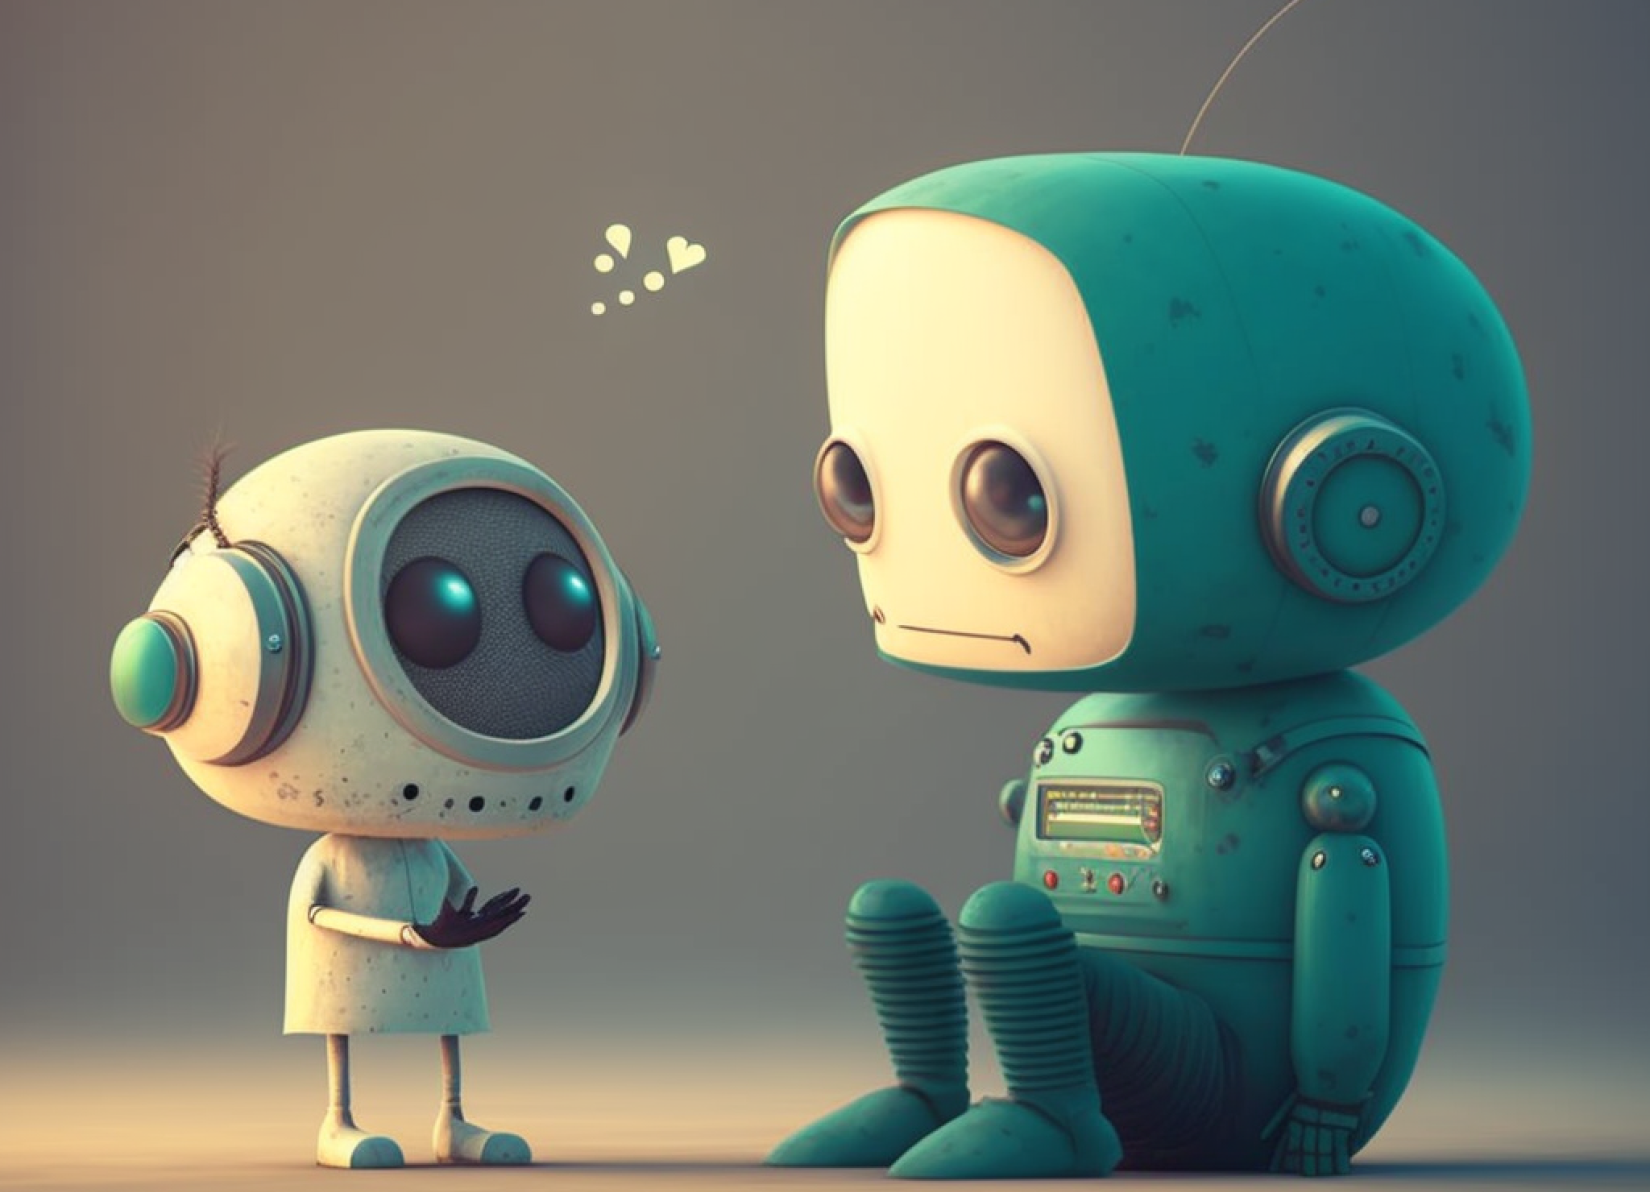 cute robot chatting with human